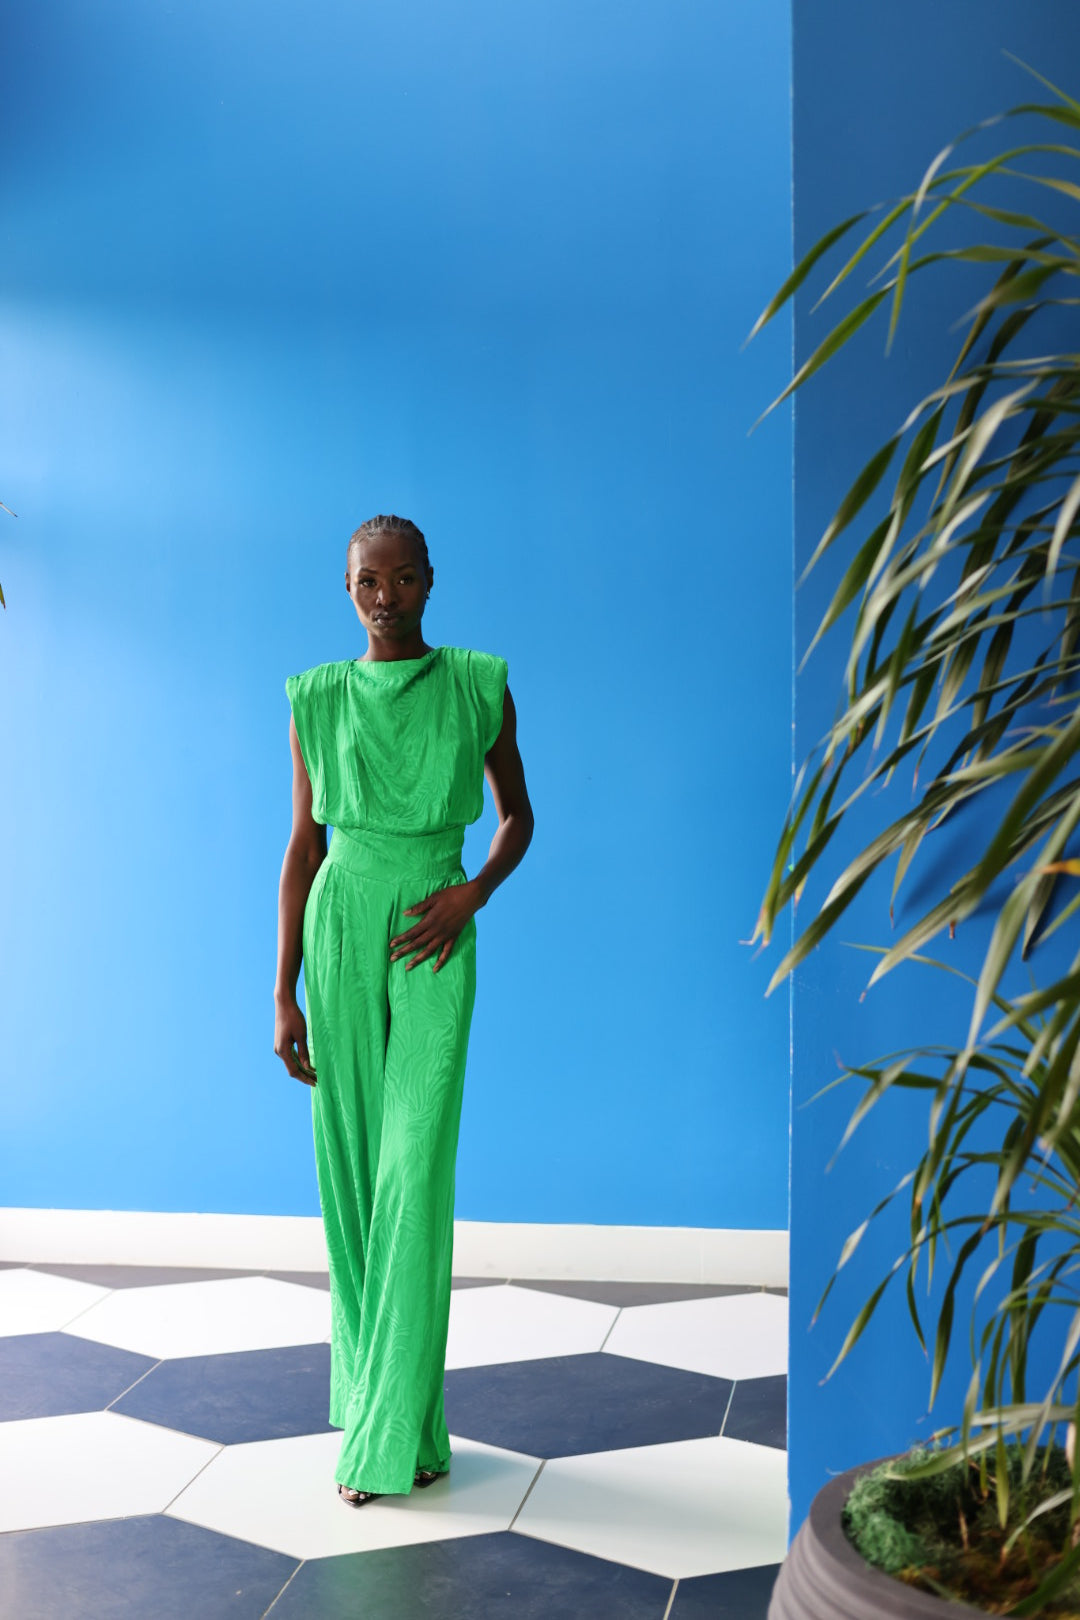 The celeste jumpsuit drapes elegantly down the body in a green-toned zebra print. Her high neckline exudes modesty without compromising the look.